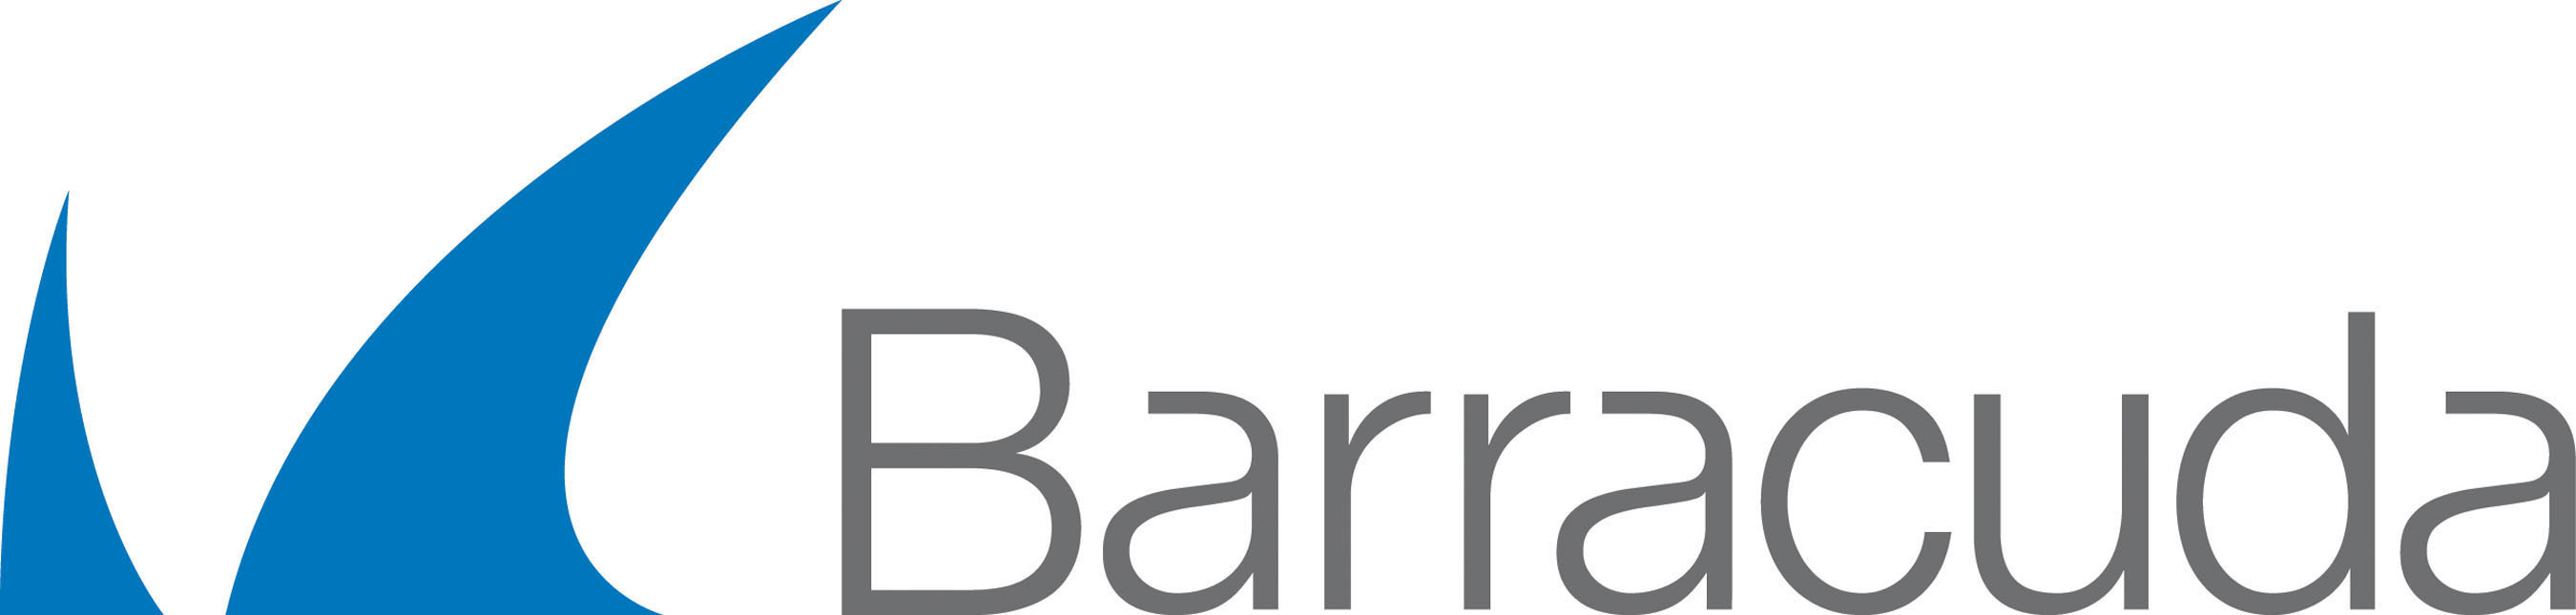 Barracuda Backup Server Unlimited Cloud Storage - Subscription License - Unlimited Capacity - 1 Month